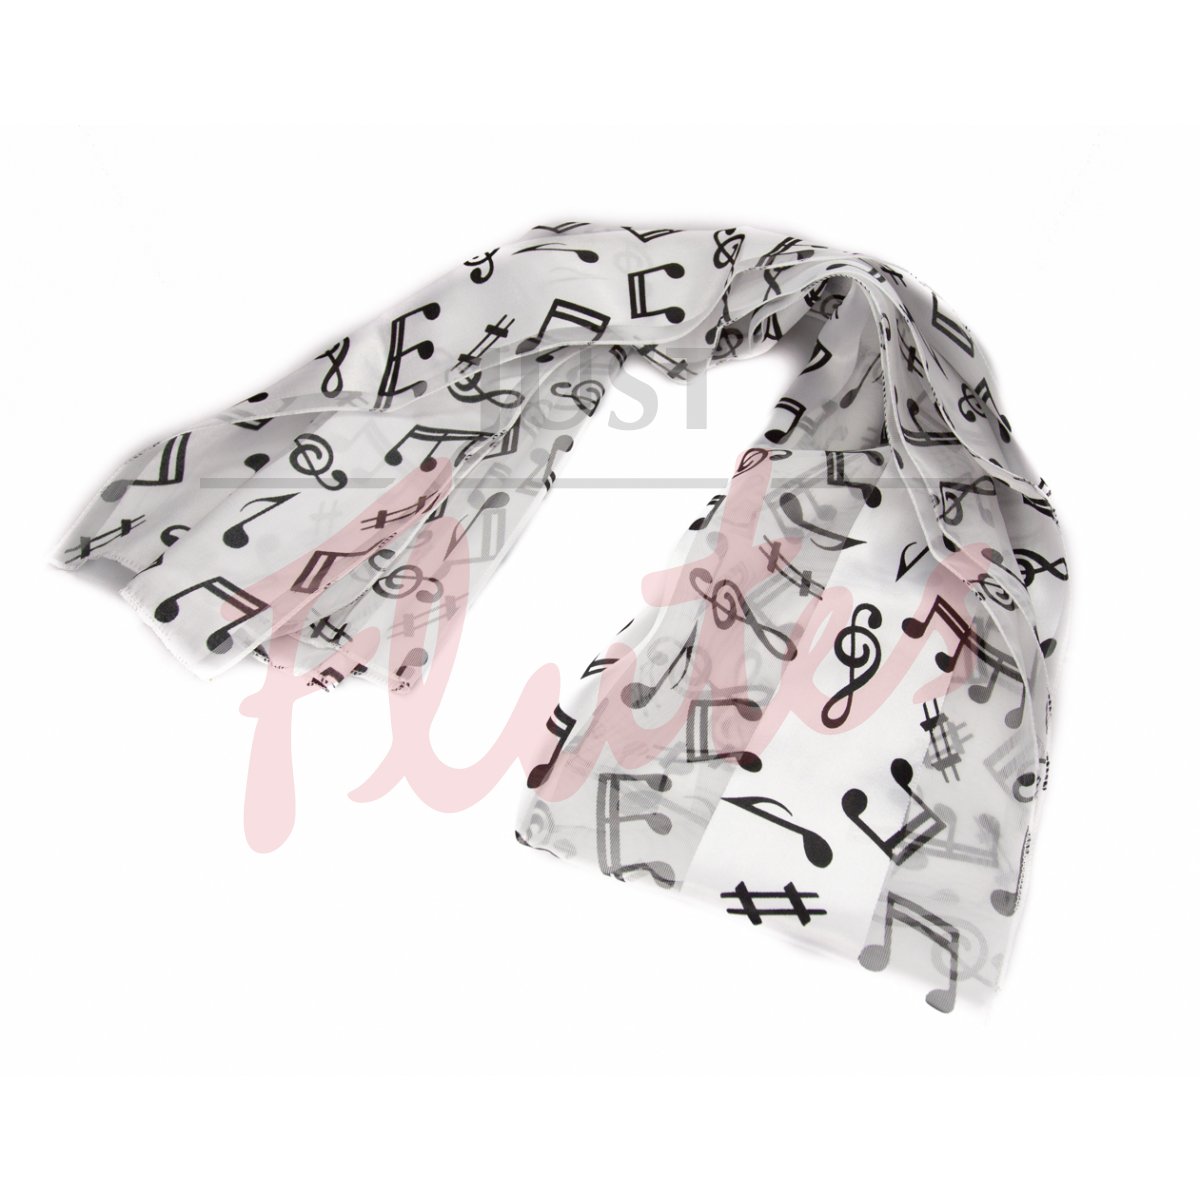 Music Scarf, Large Notes on Satin Stripes, White with Black Notes